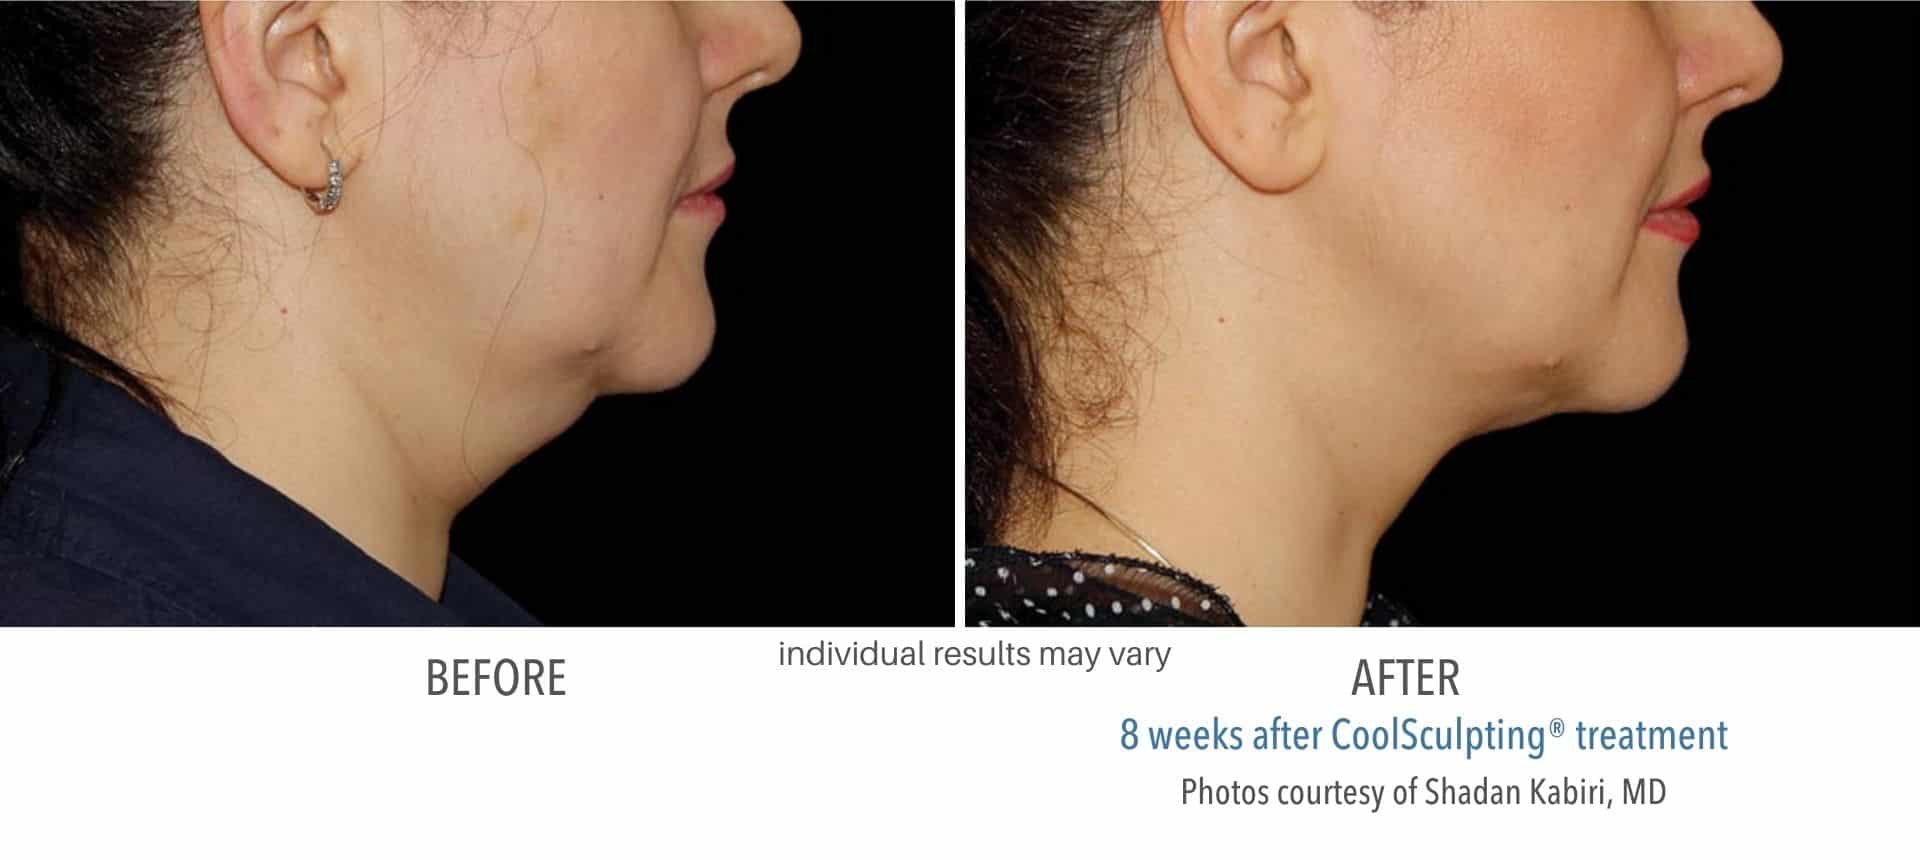 Jawline sculpting before and after: the best treatments for a